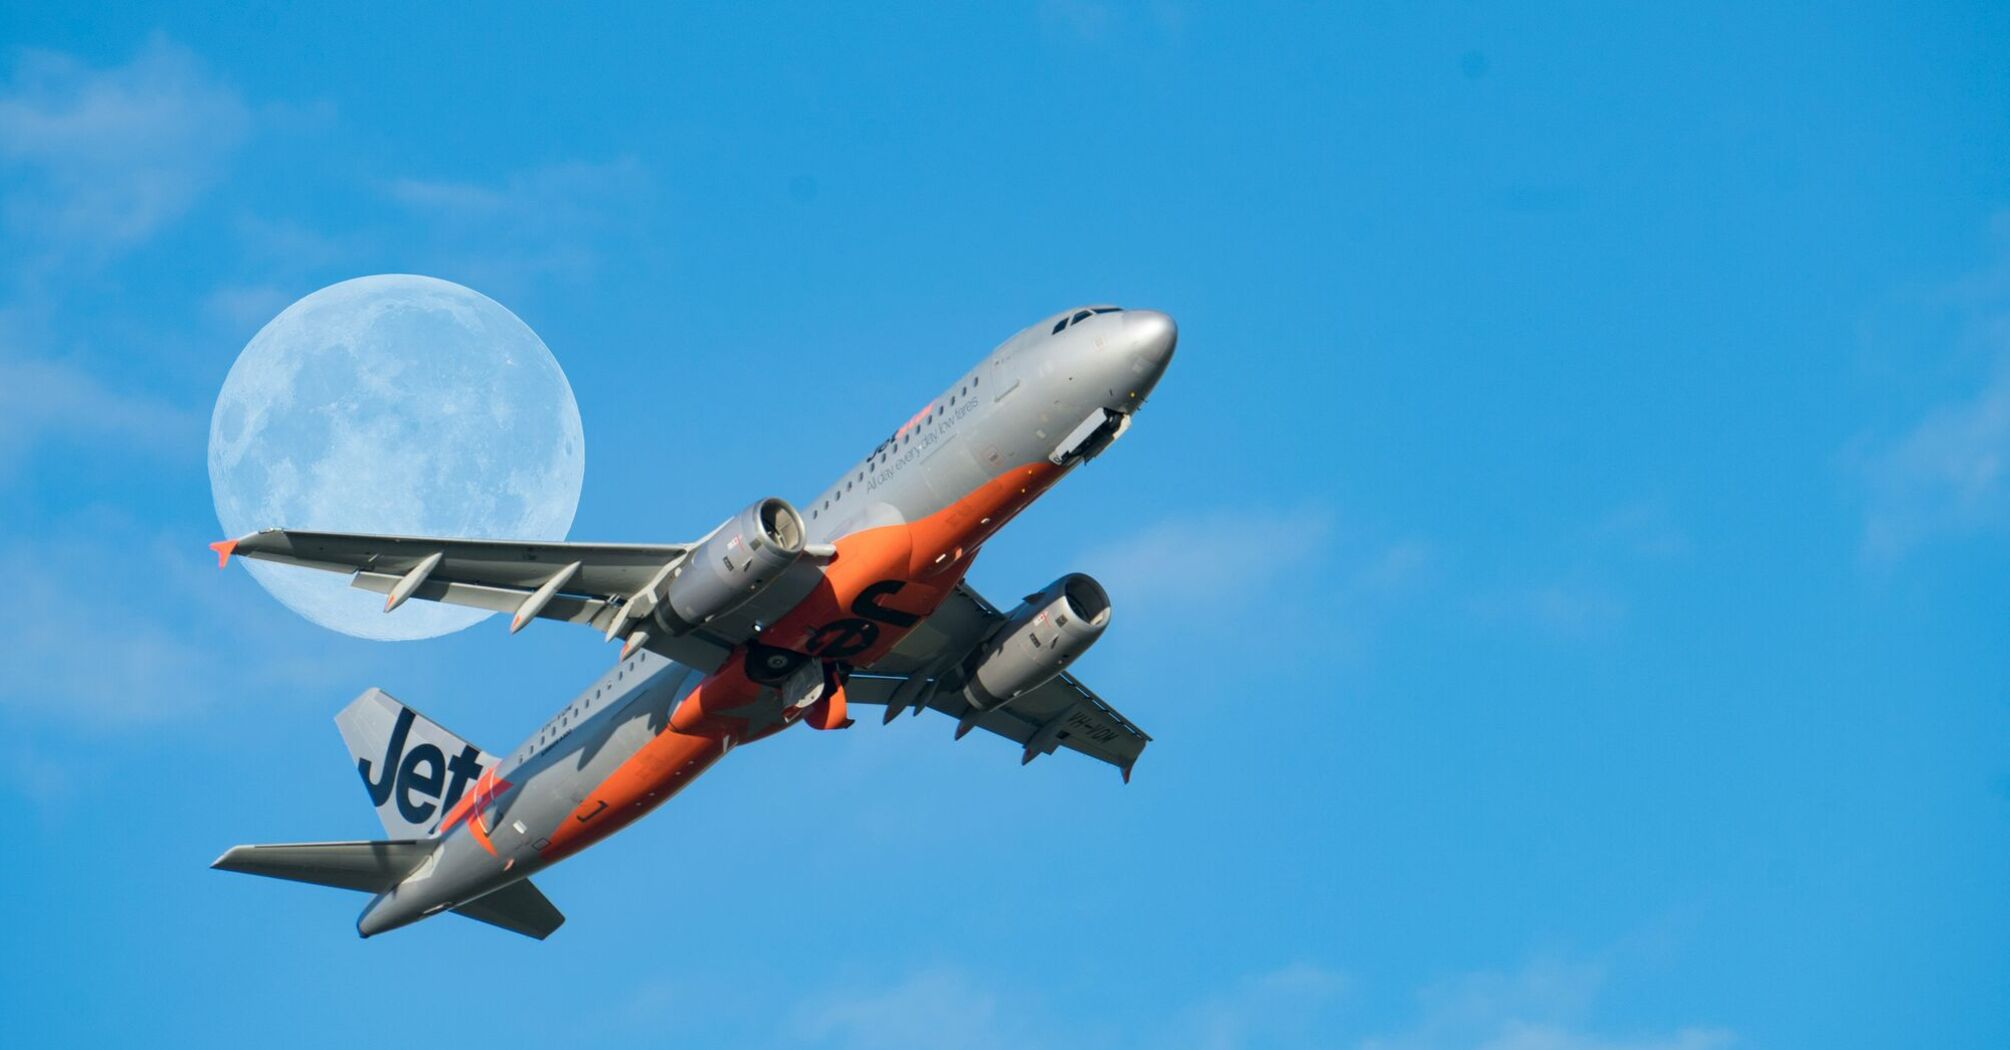 low angle photography of gray and red Jetstar passenger plane